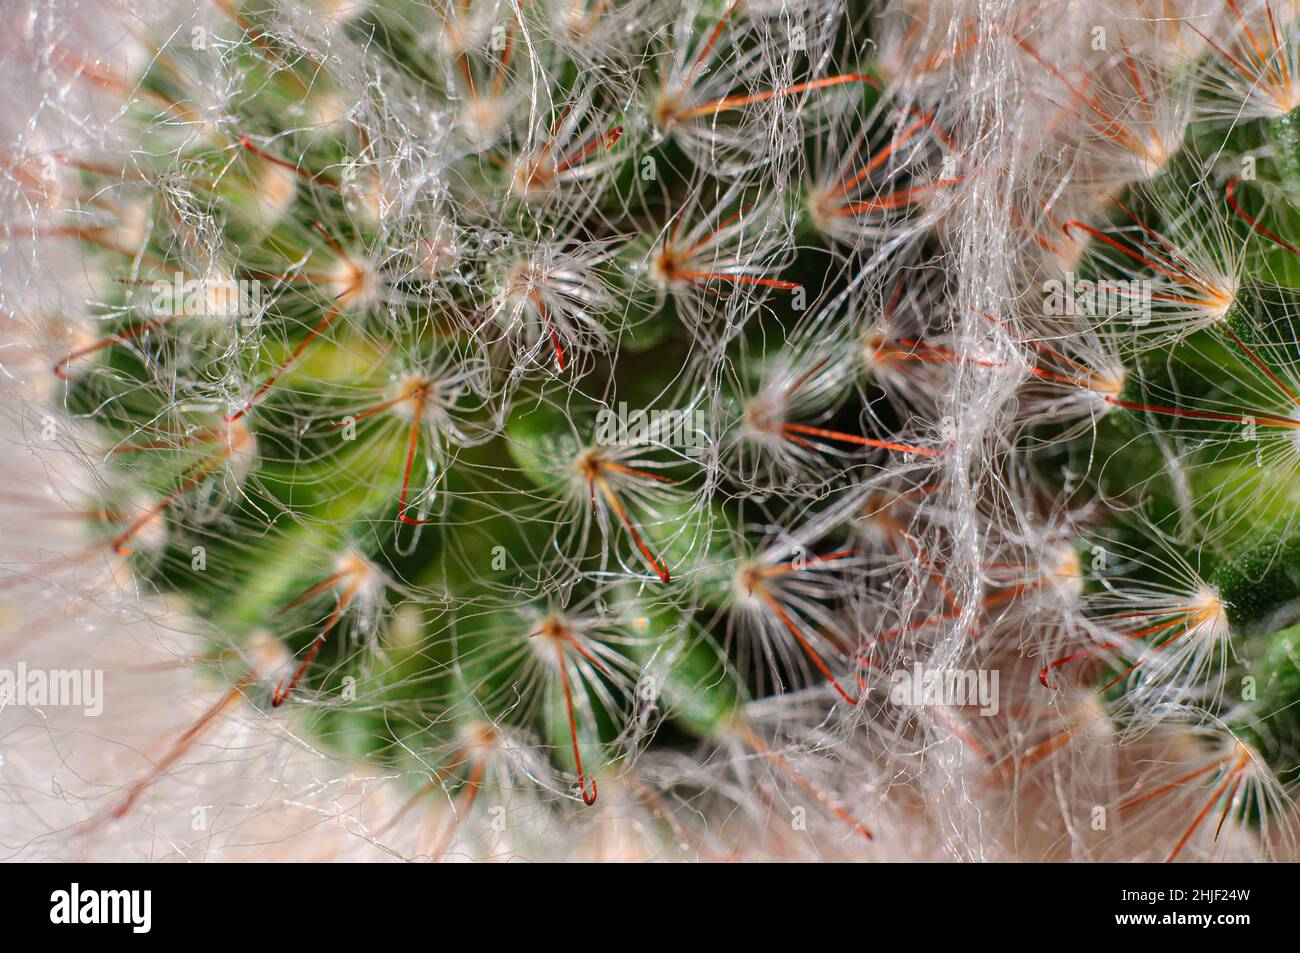 Home cactus macro photo, white threads of fluff and needles in the form of hooks. Soft focus background. Stock Photo